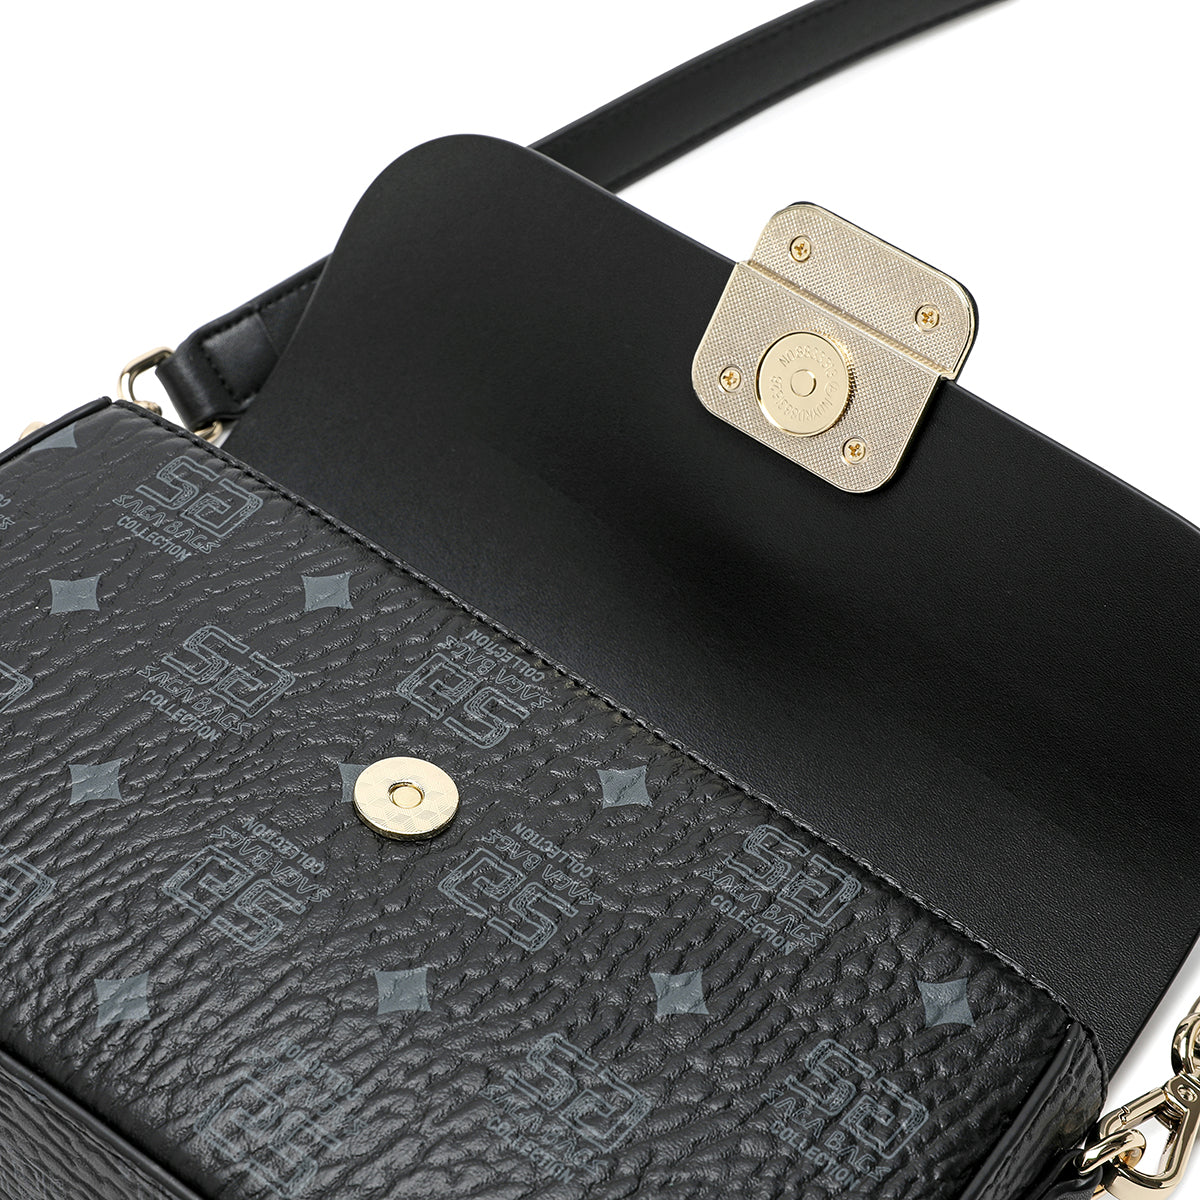 A distinctive and practical bag in luxurious leather with a distinctive chain, black color, 24.5 cm wide